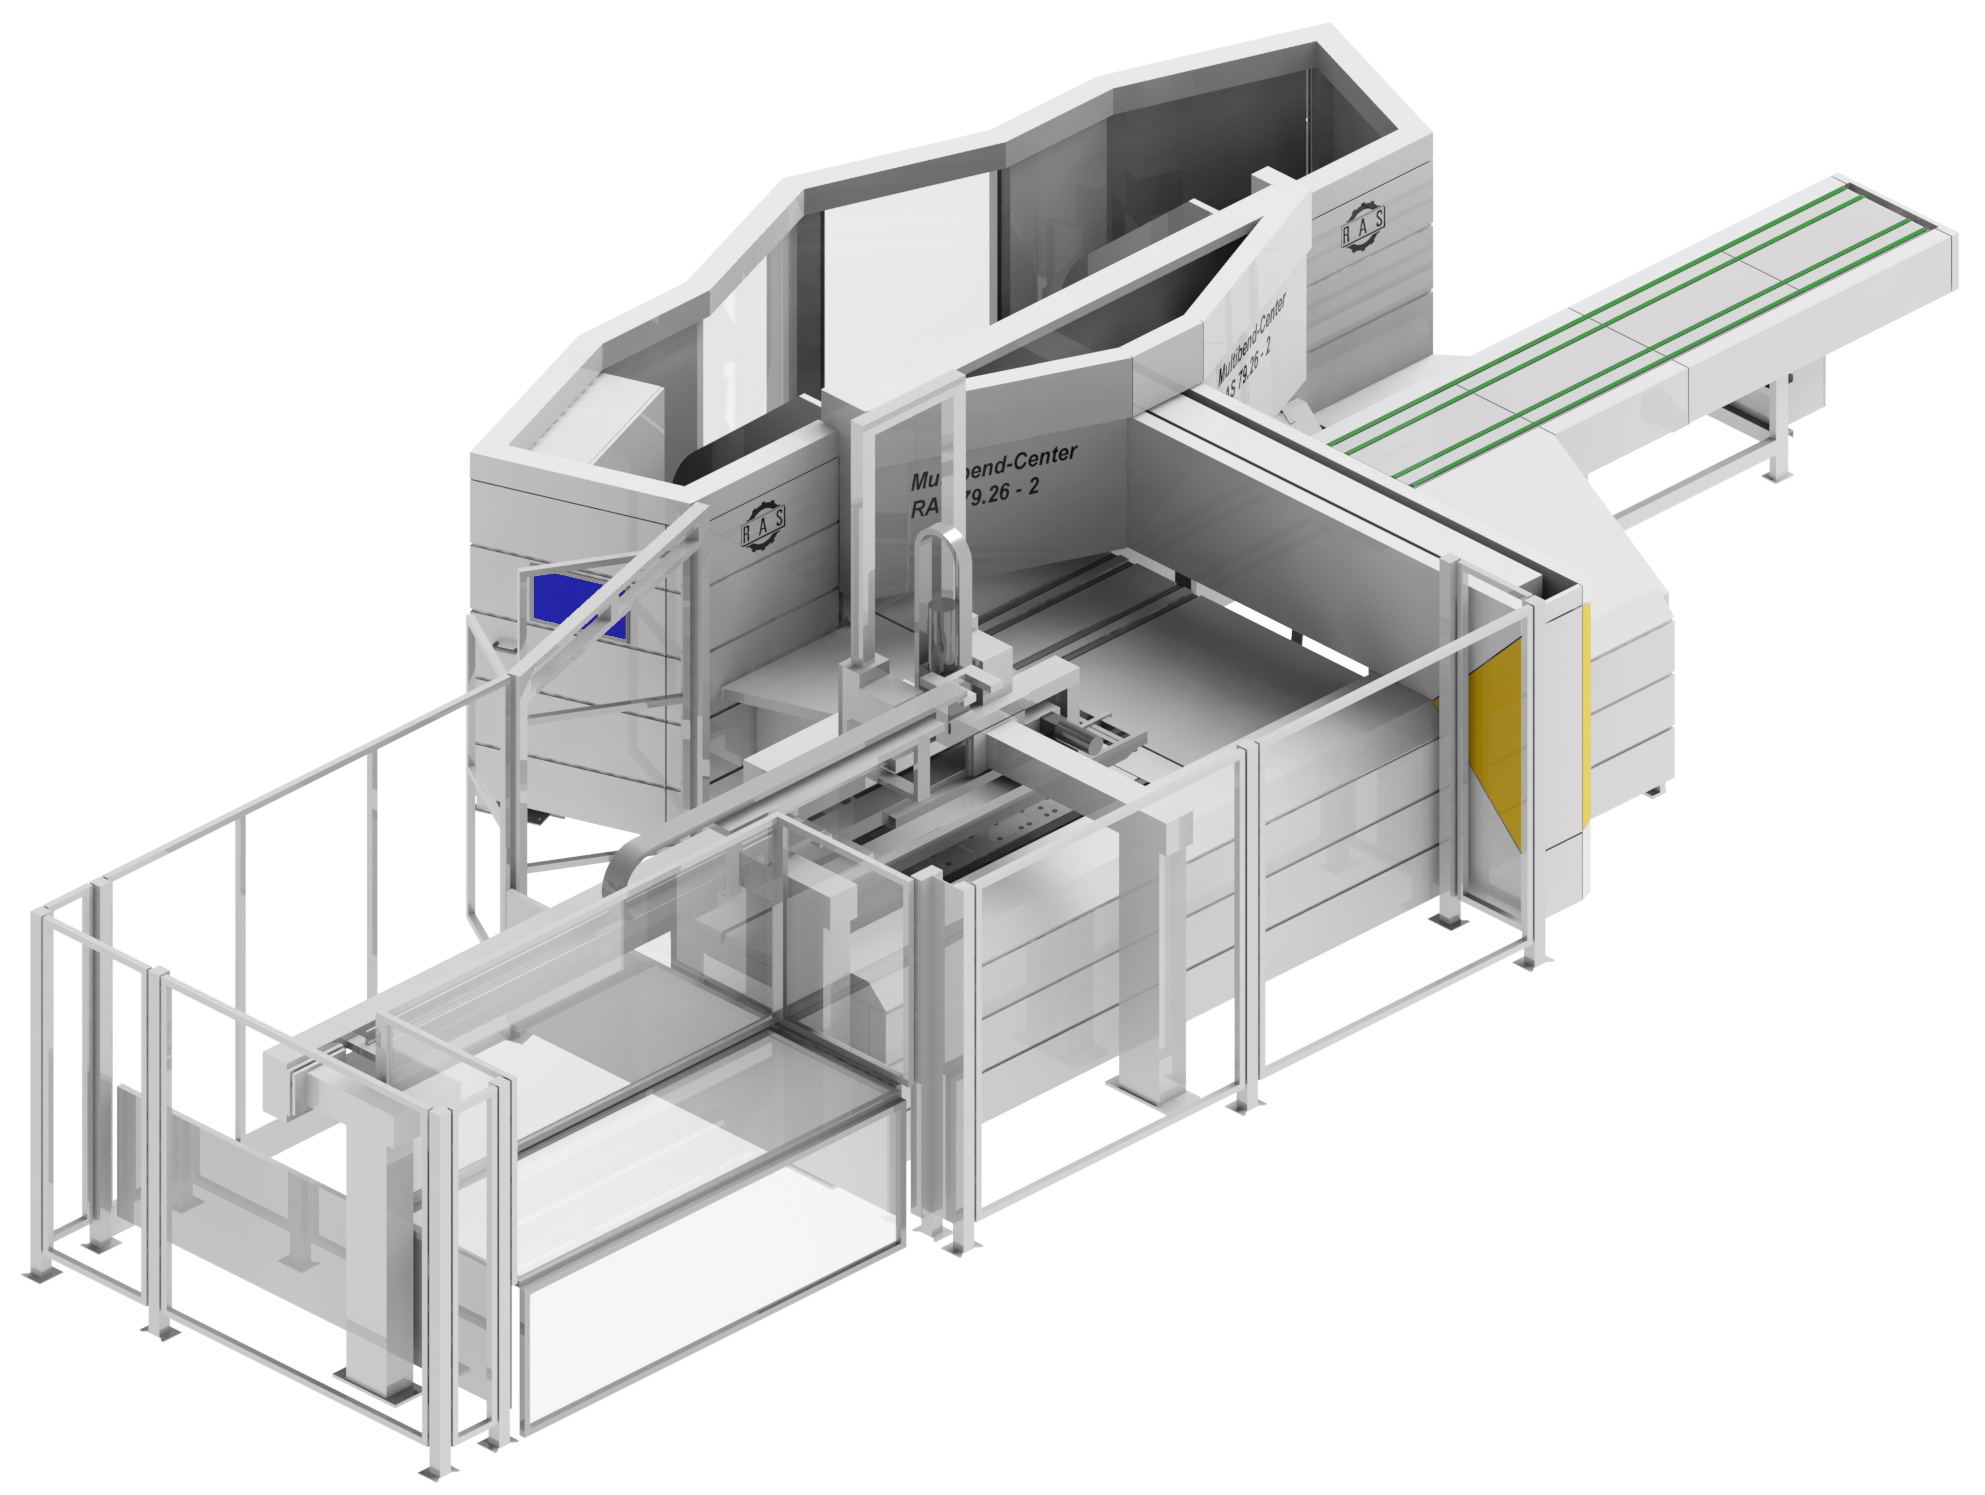 Automatic blank loading from a single stack with the 1-station gantry loader. Optional: 2-station gantry loader.